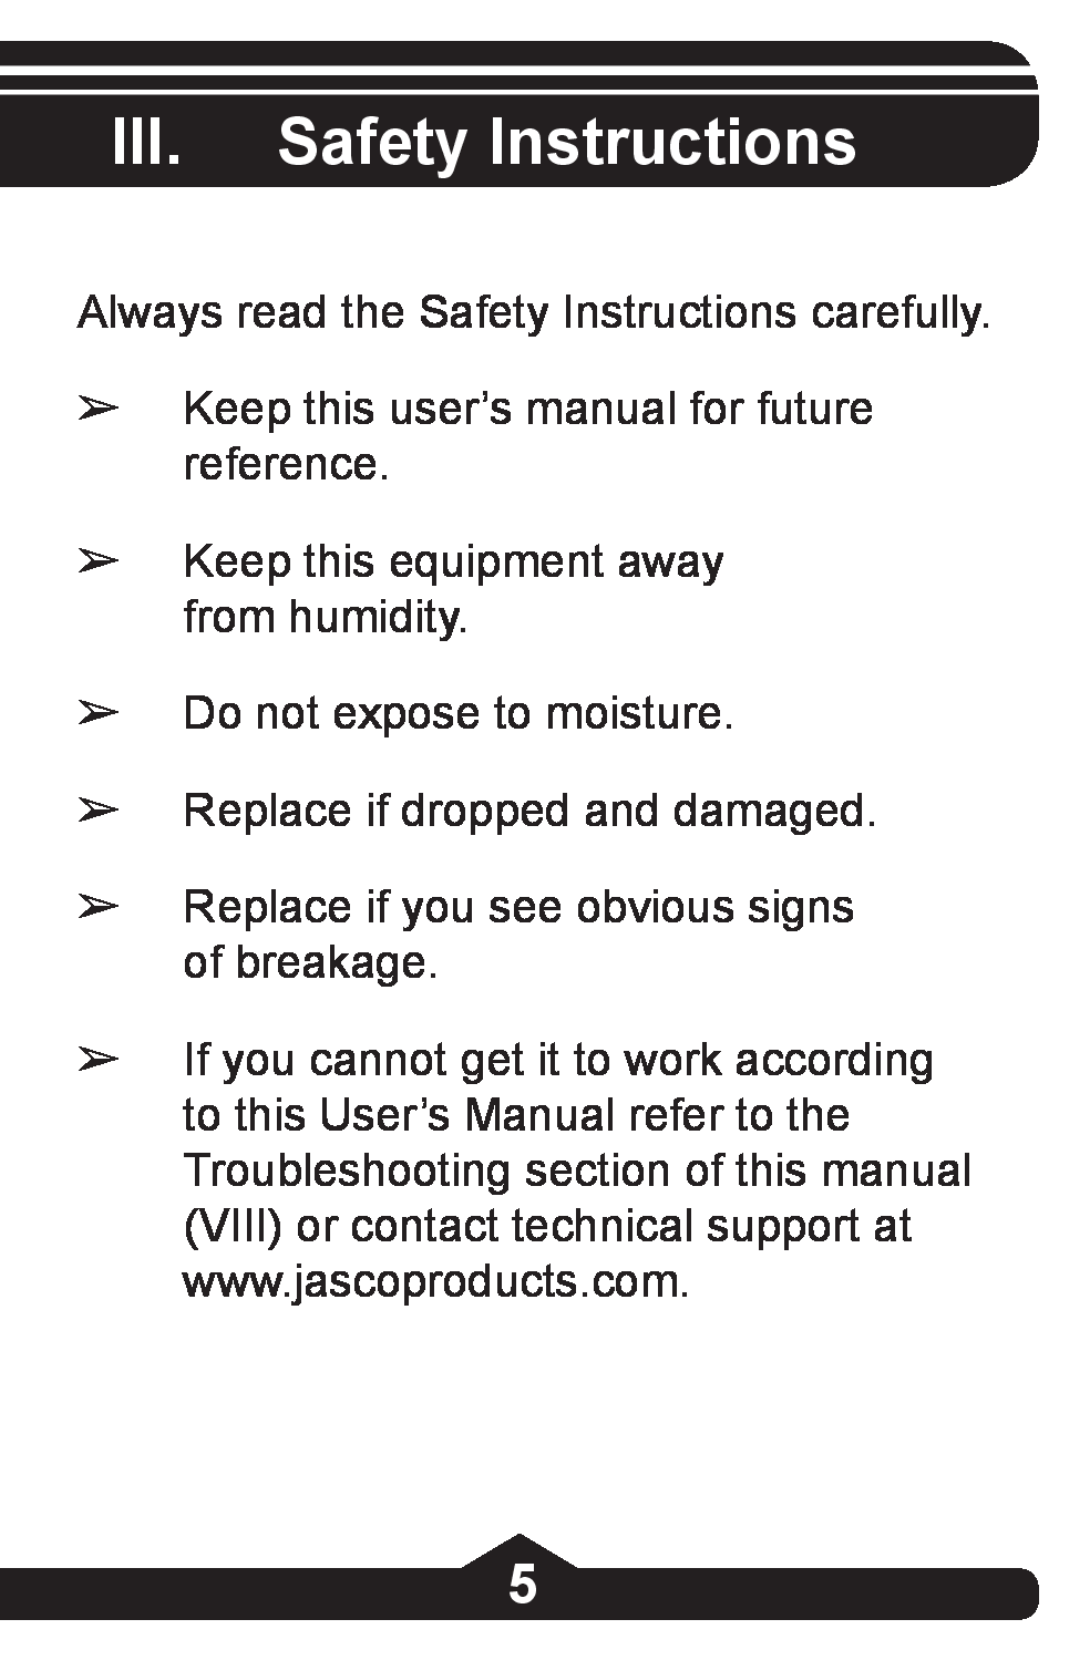 Jasco HO97844 III. Safety Instructions, Always read the Safety Instructions carefully, Replace if dropped and damaged 